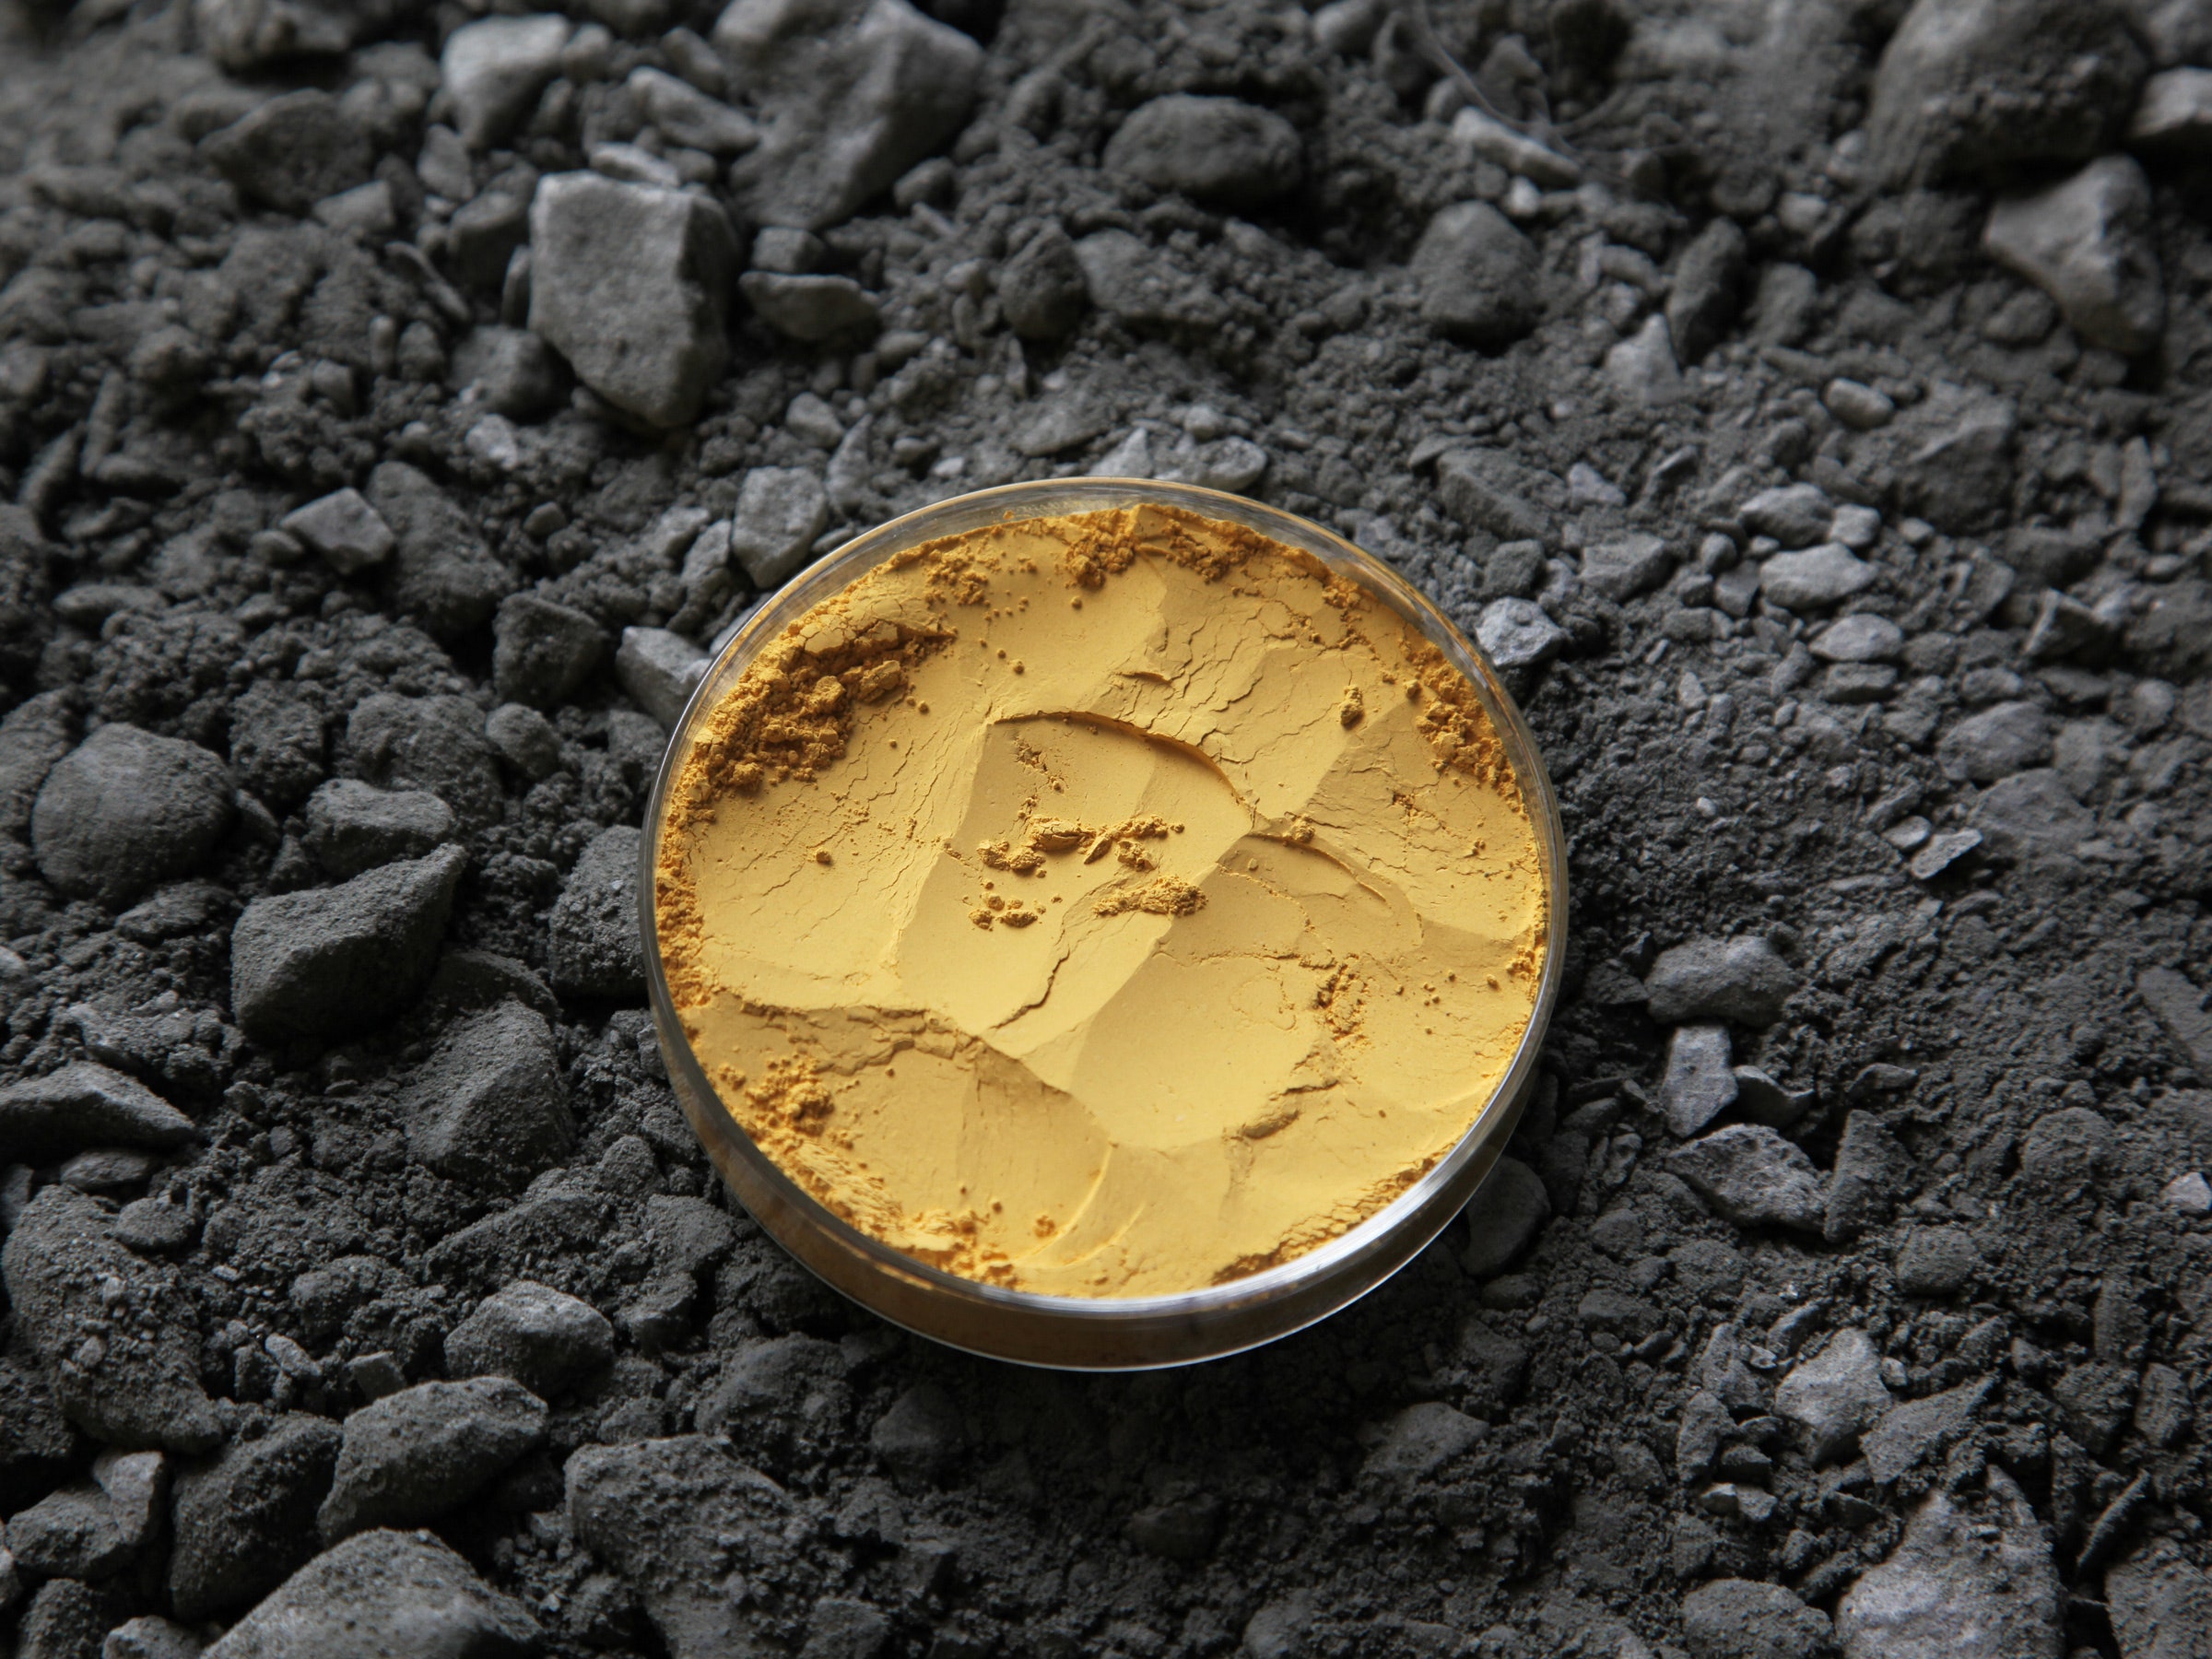 Yellow Cake CEO sees ‘clear shift’ in uranium sentiment